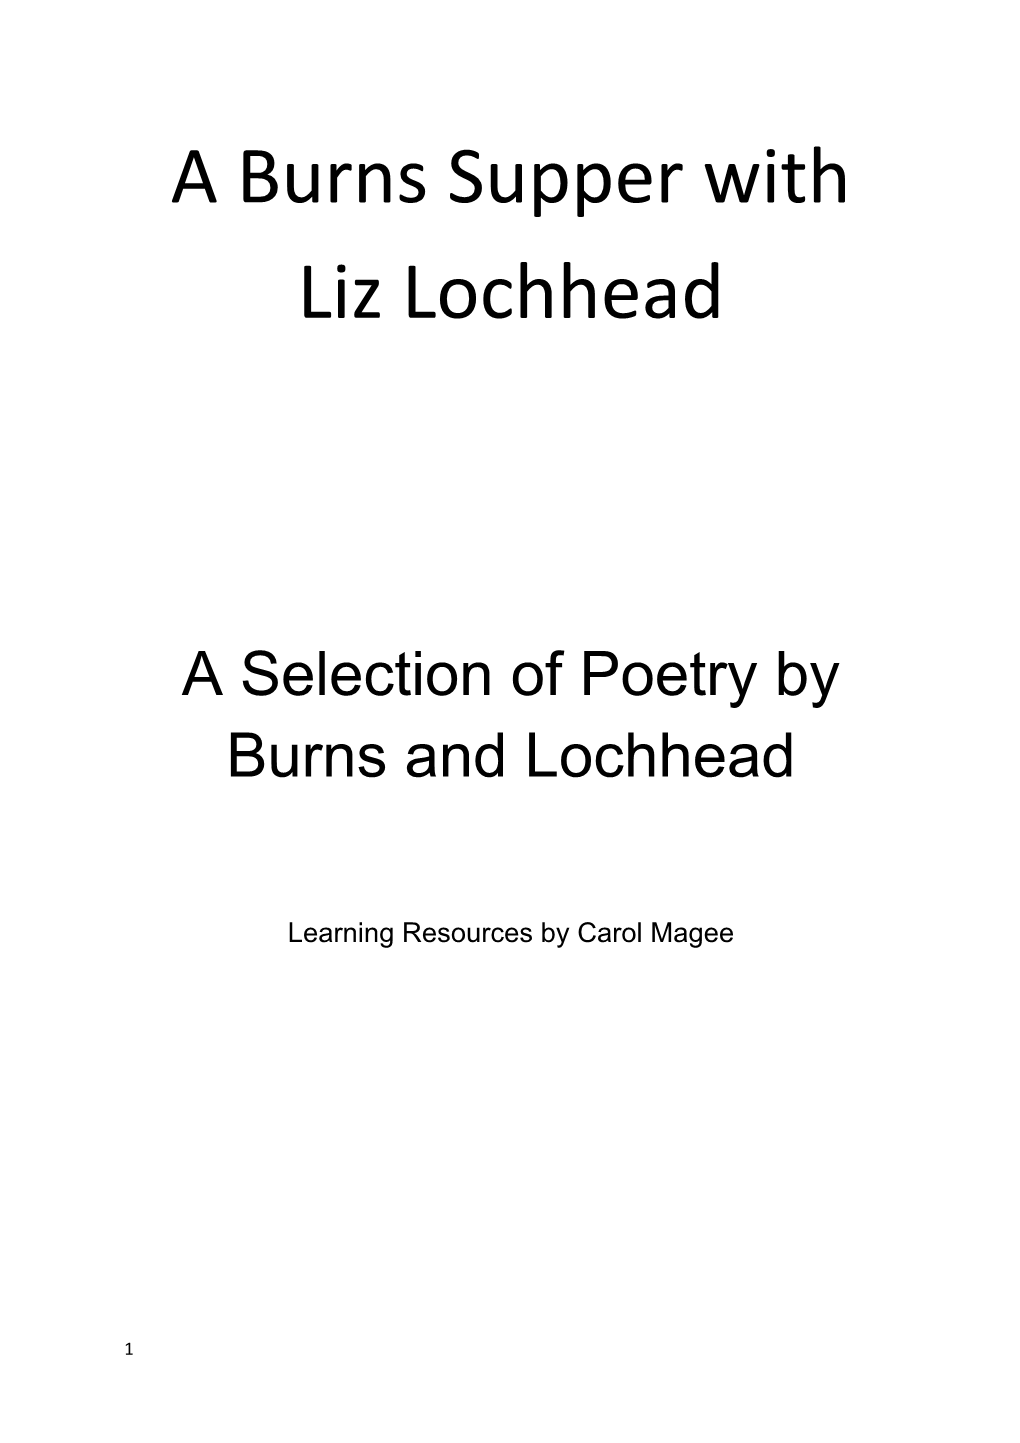 A Burns Supper with Liz Lochhead